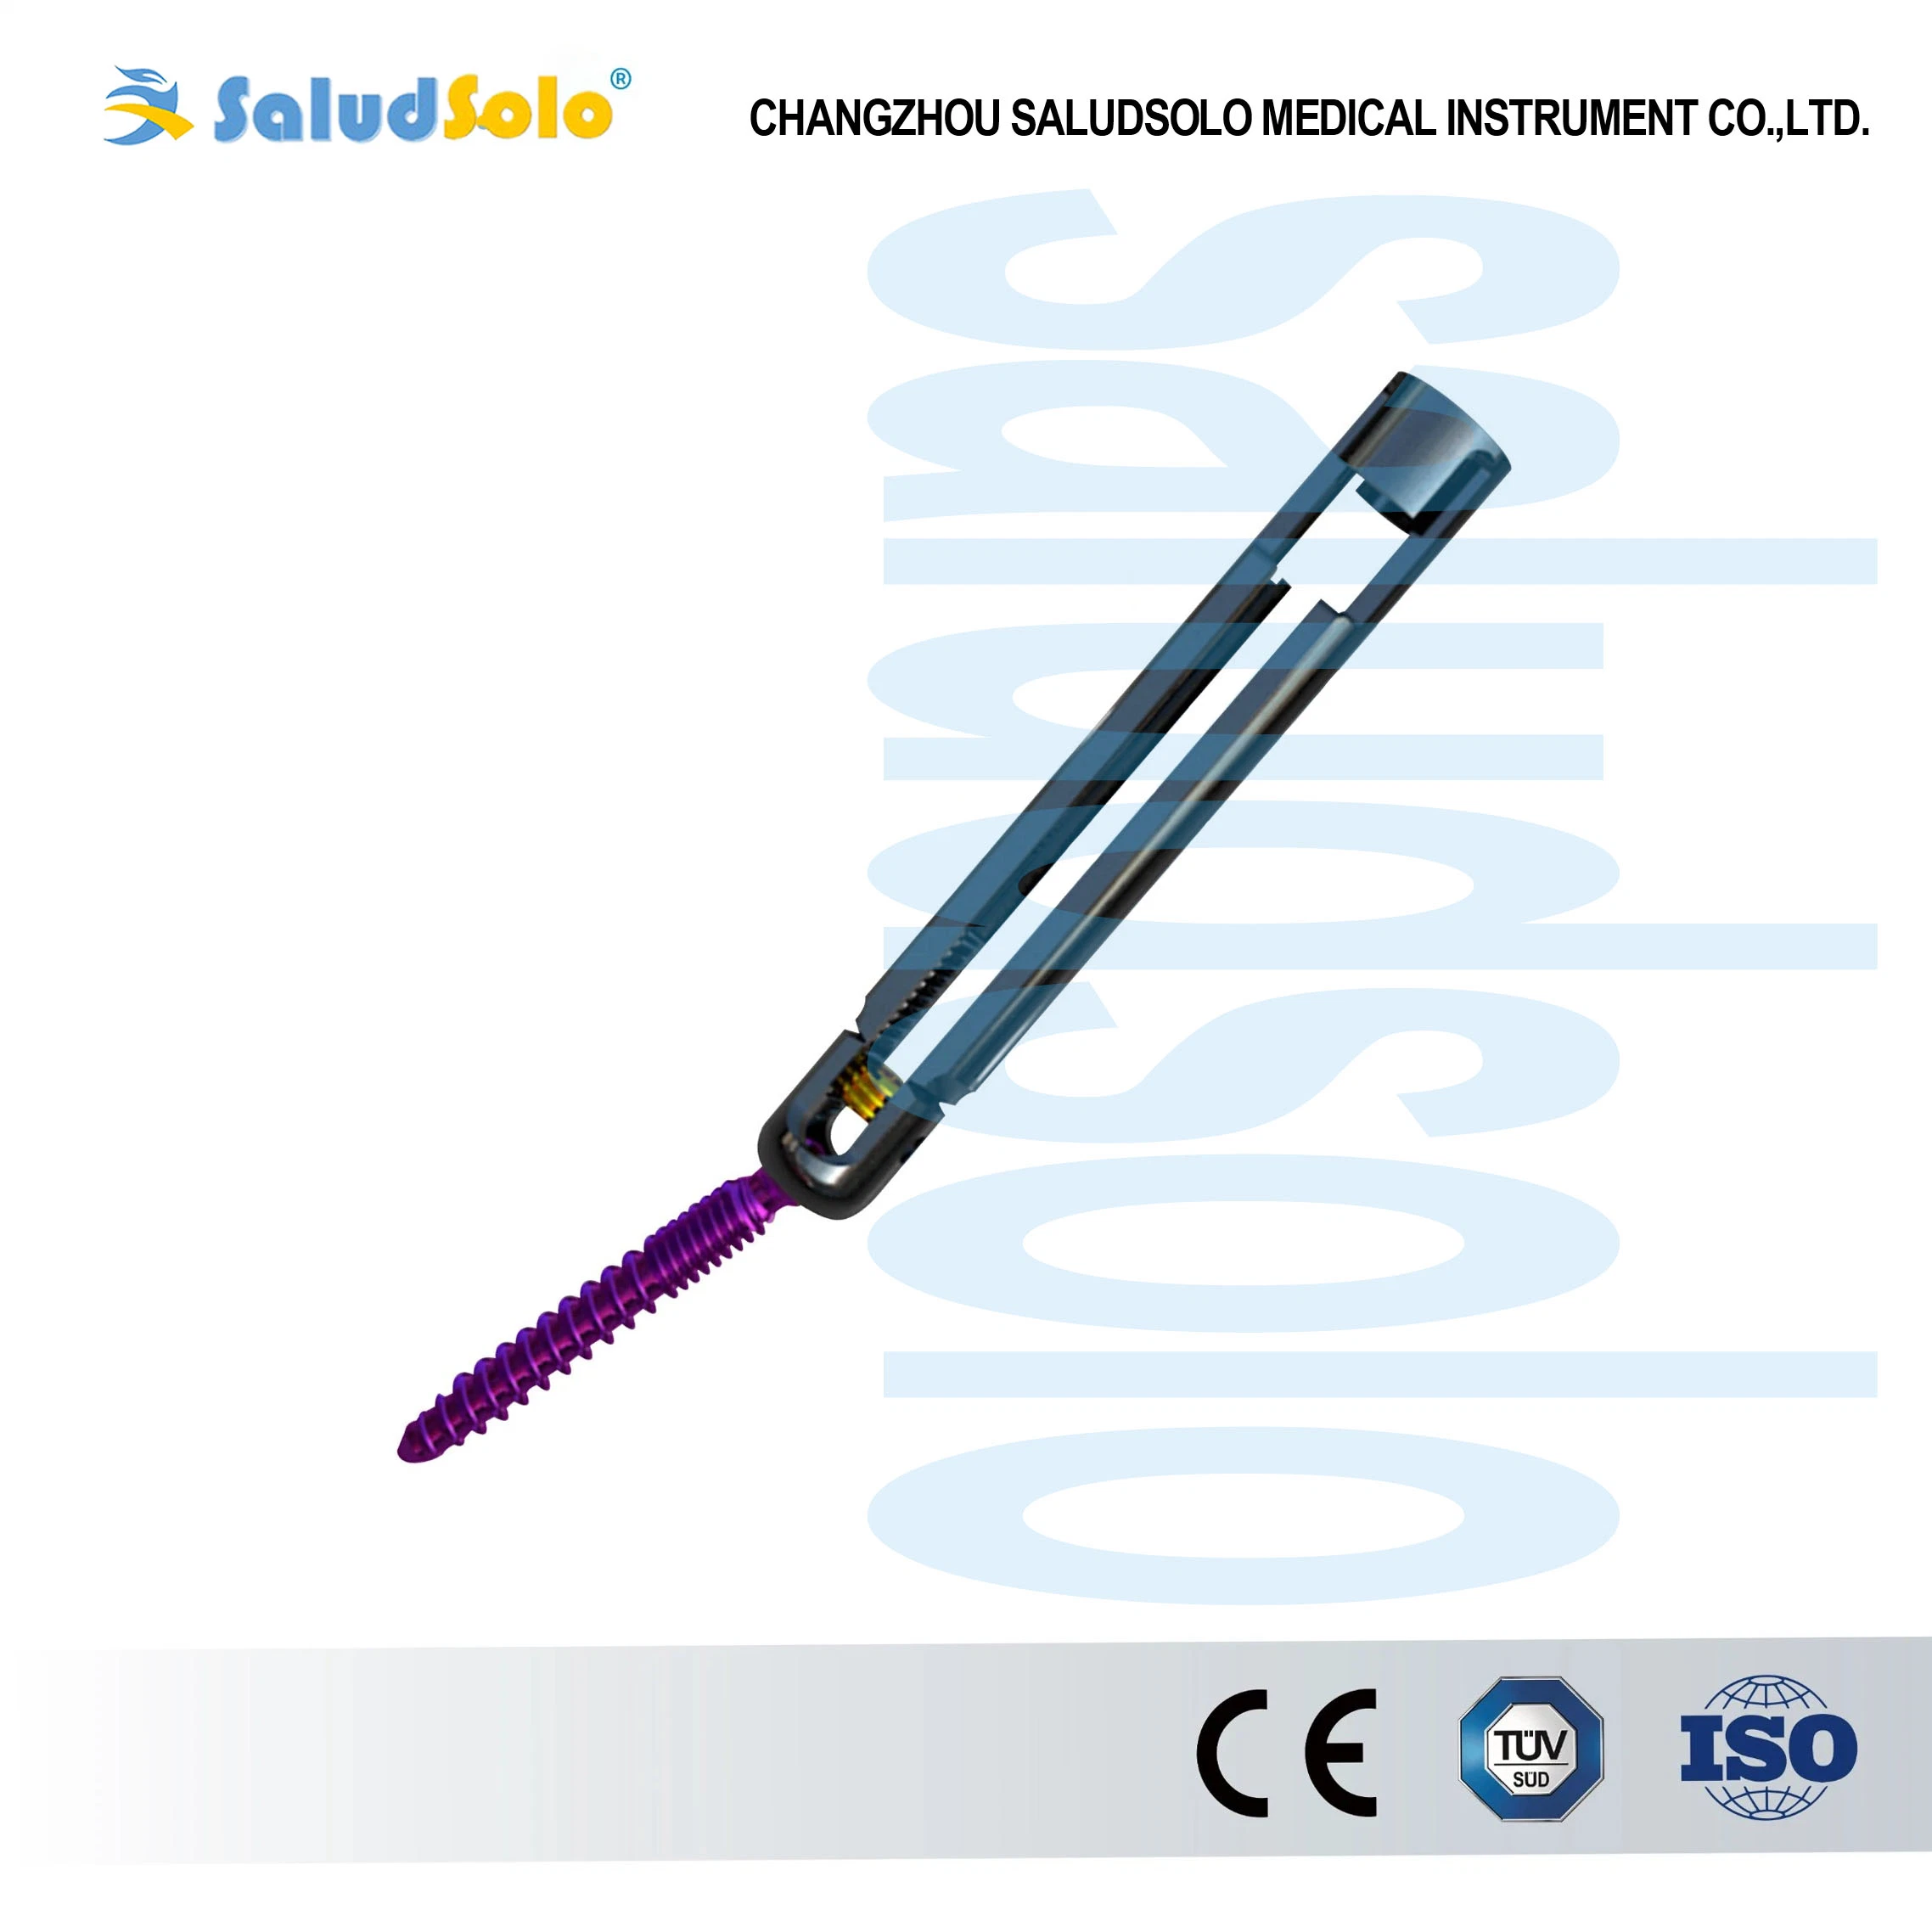 Mis Polyaxial Reduction Pedicle Screw, Minimally Invasive Spinal System, Titanium, Orthopedic Surgical Implant for Spine Surgery, Medical Products with CE&ISO